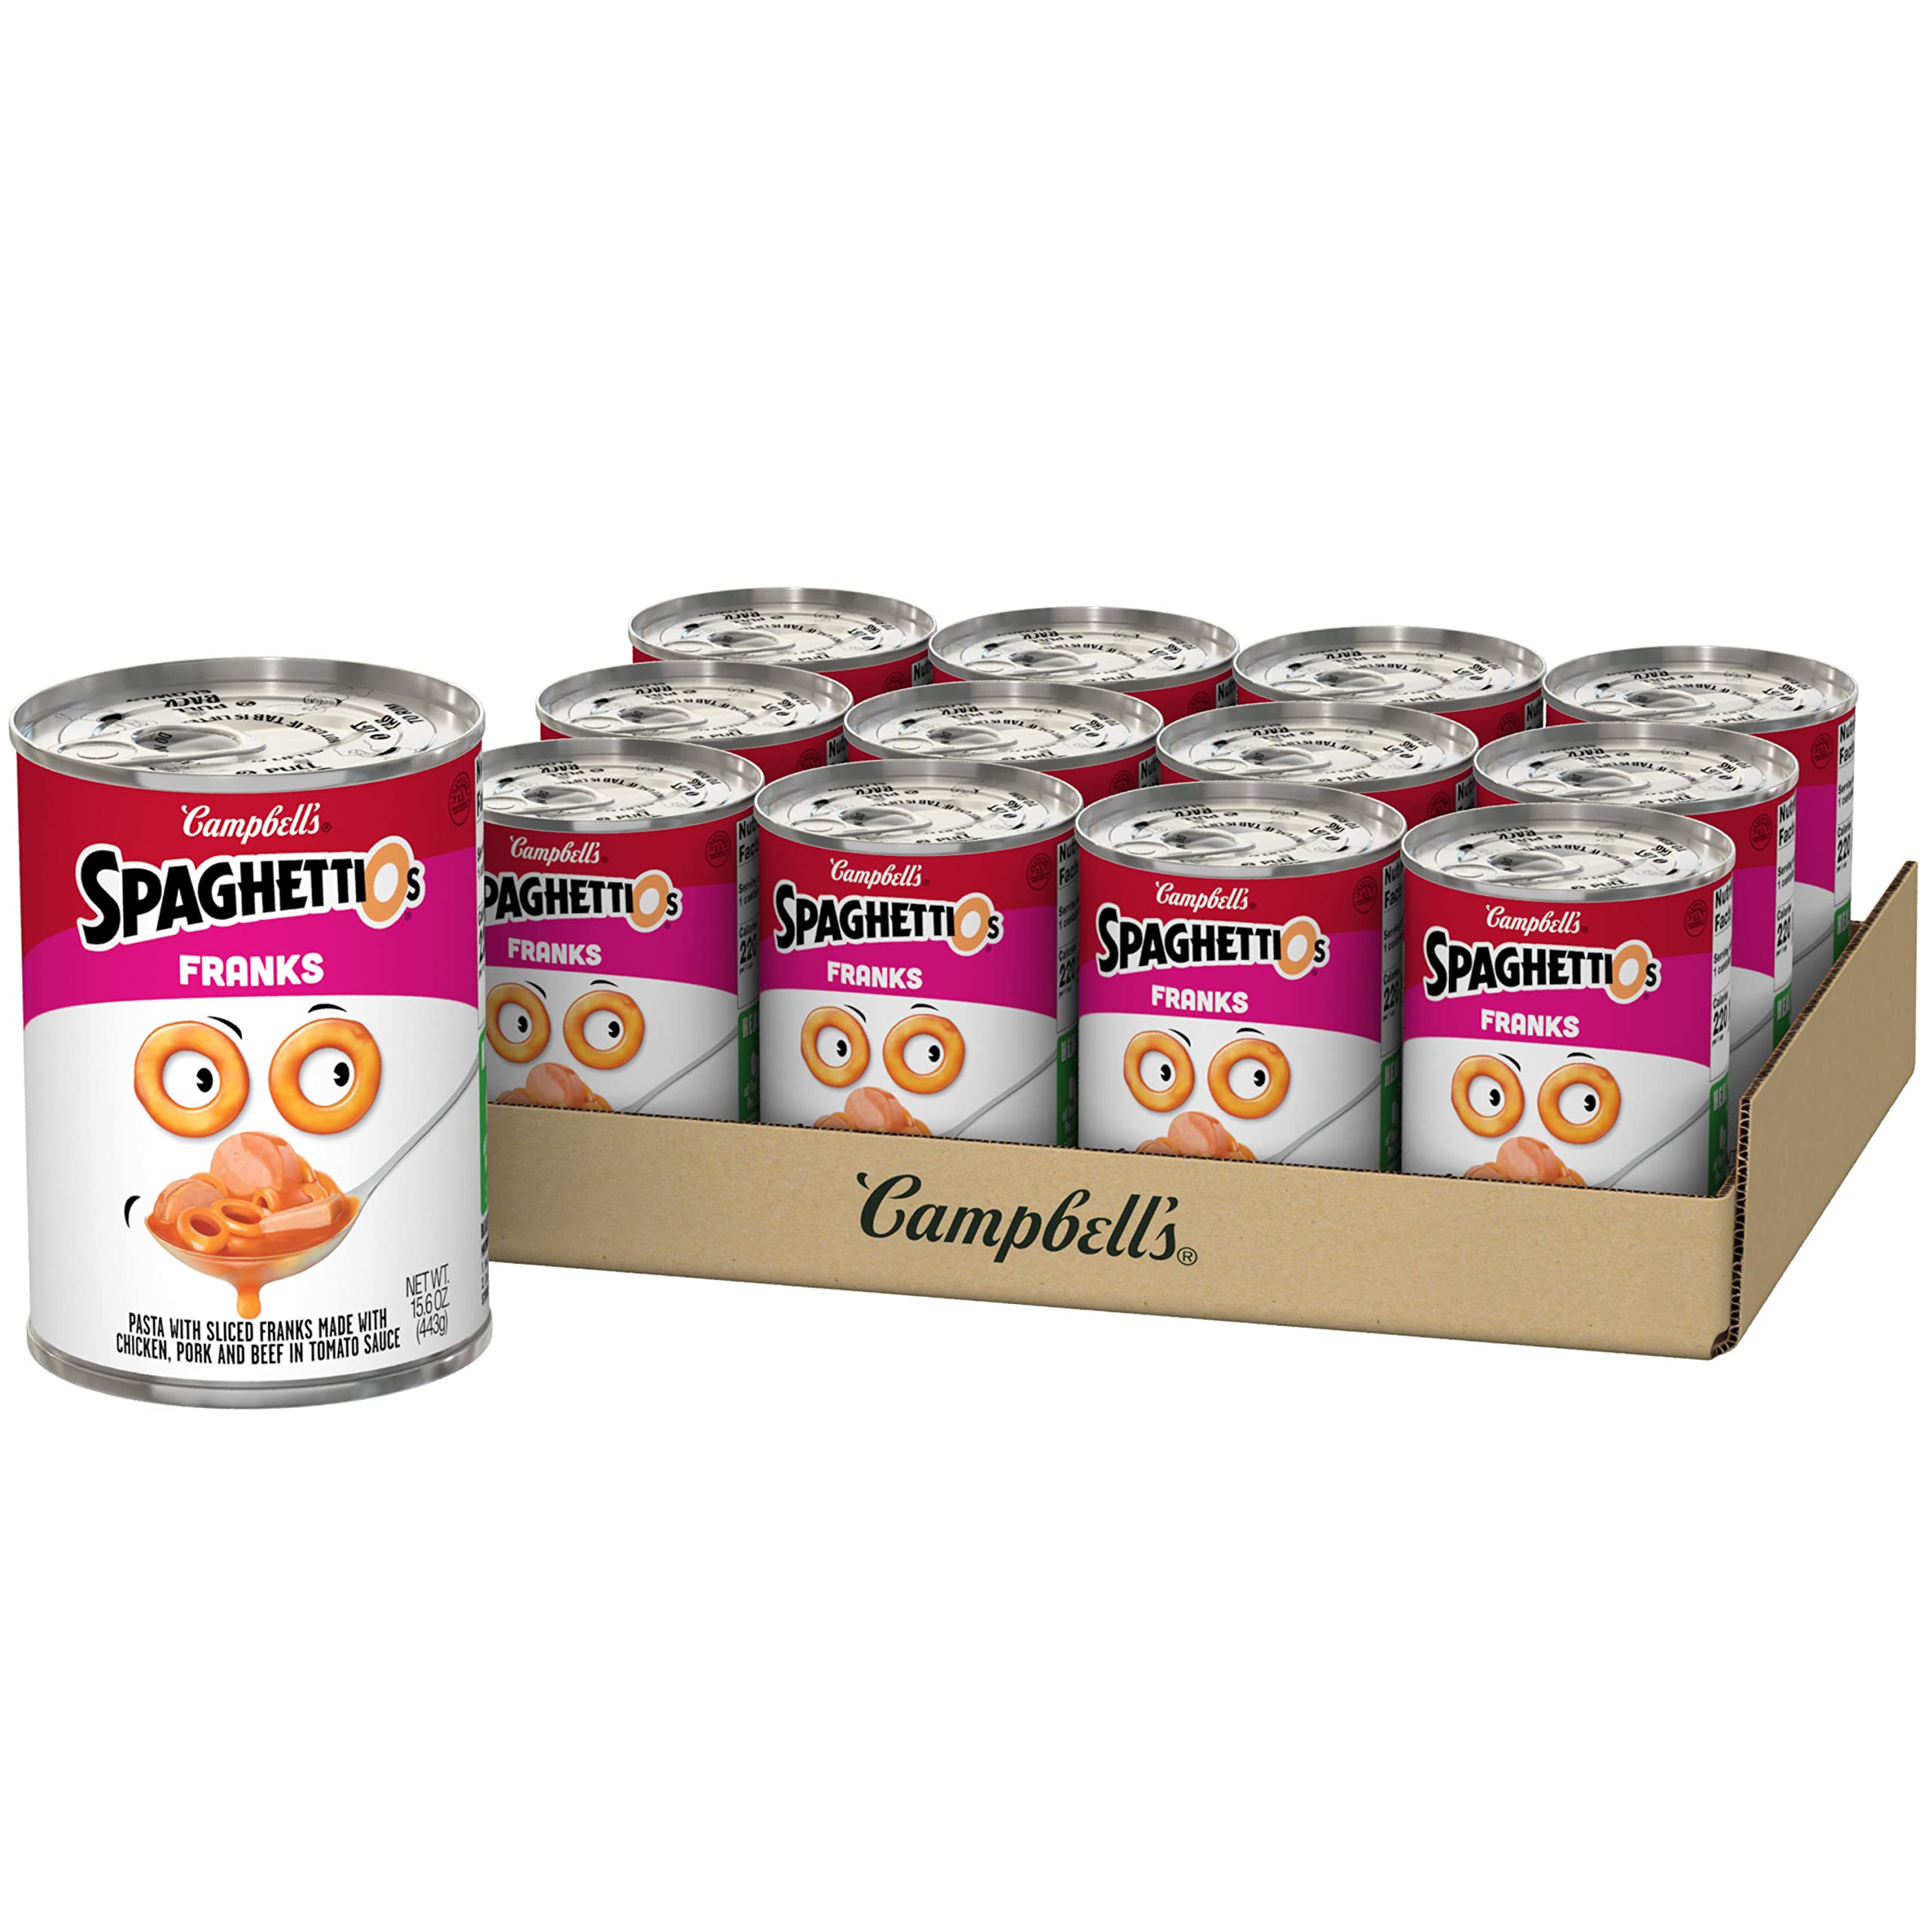 SpaghettiOs Canned Pasta with Franks, 15.6 OZ Can - DroneUp Delivery